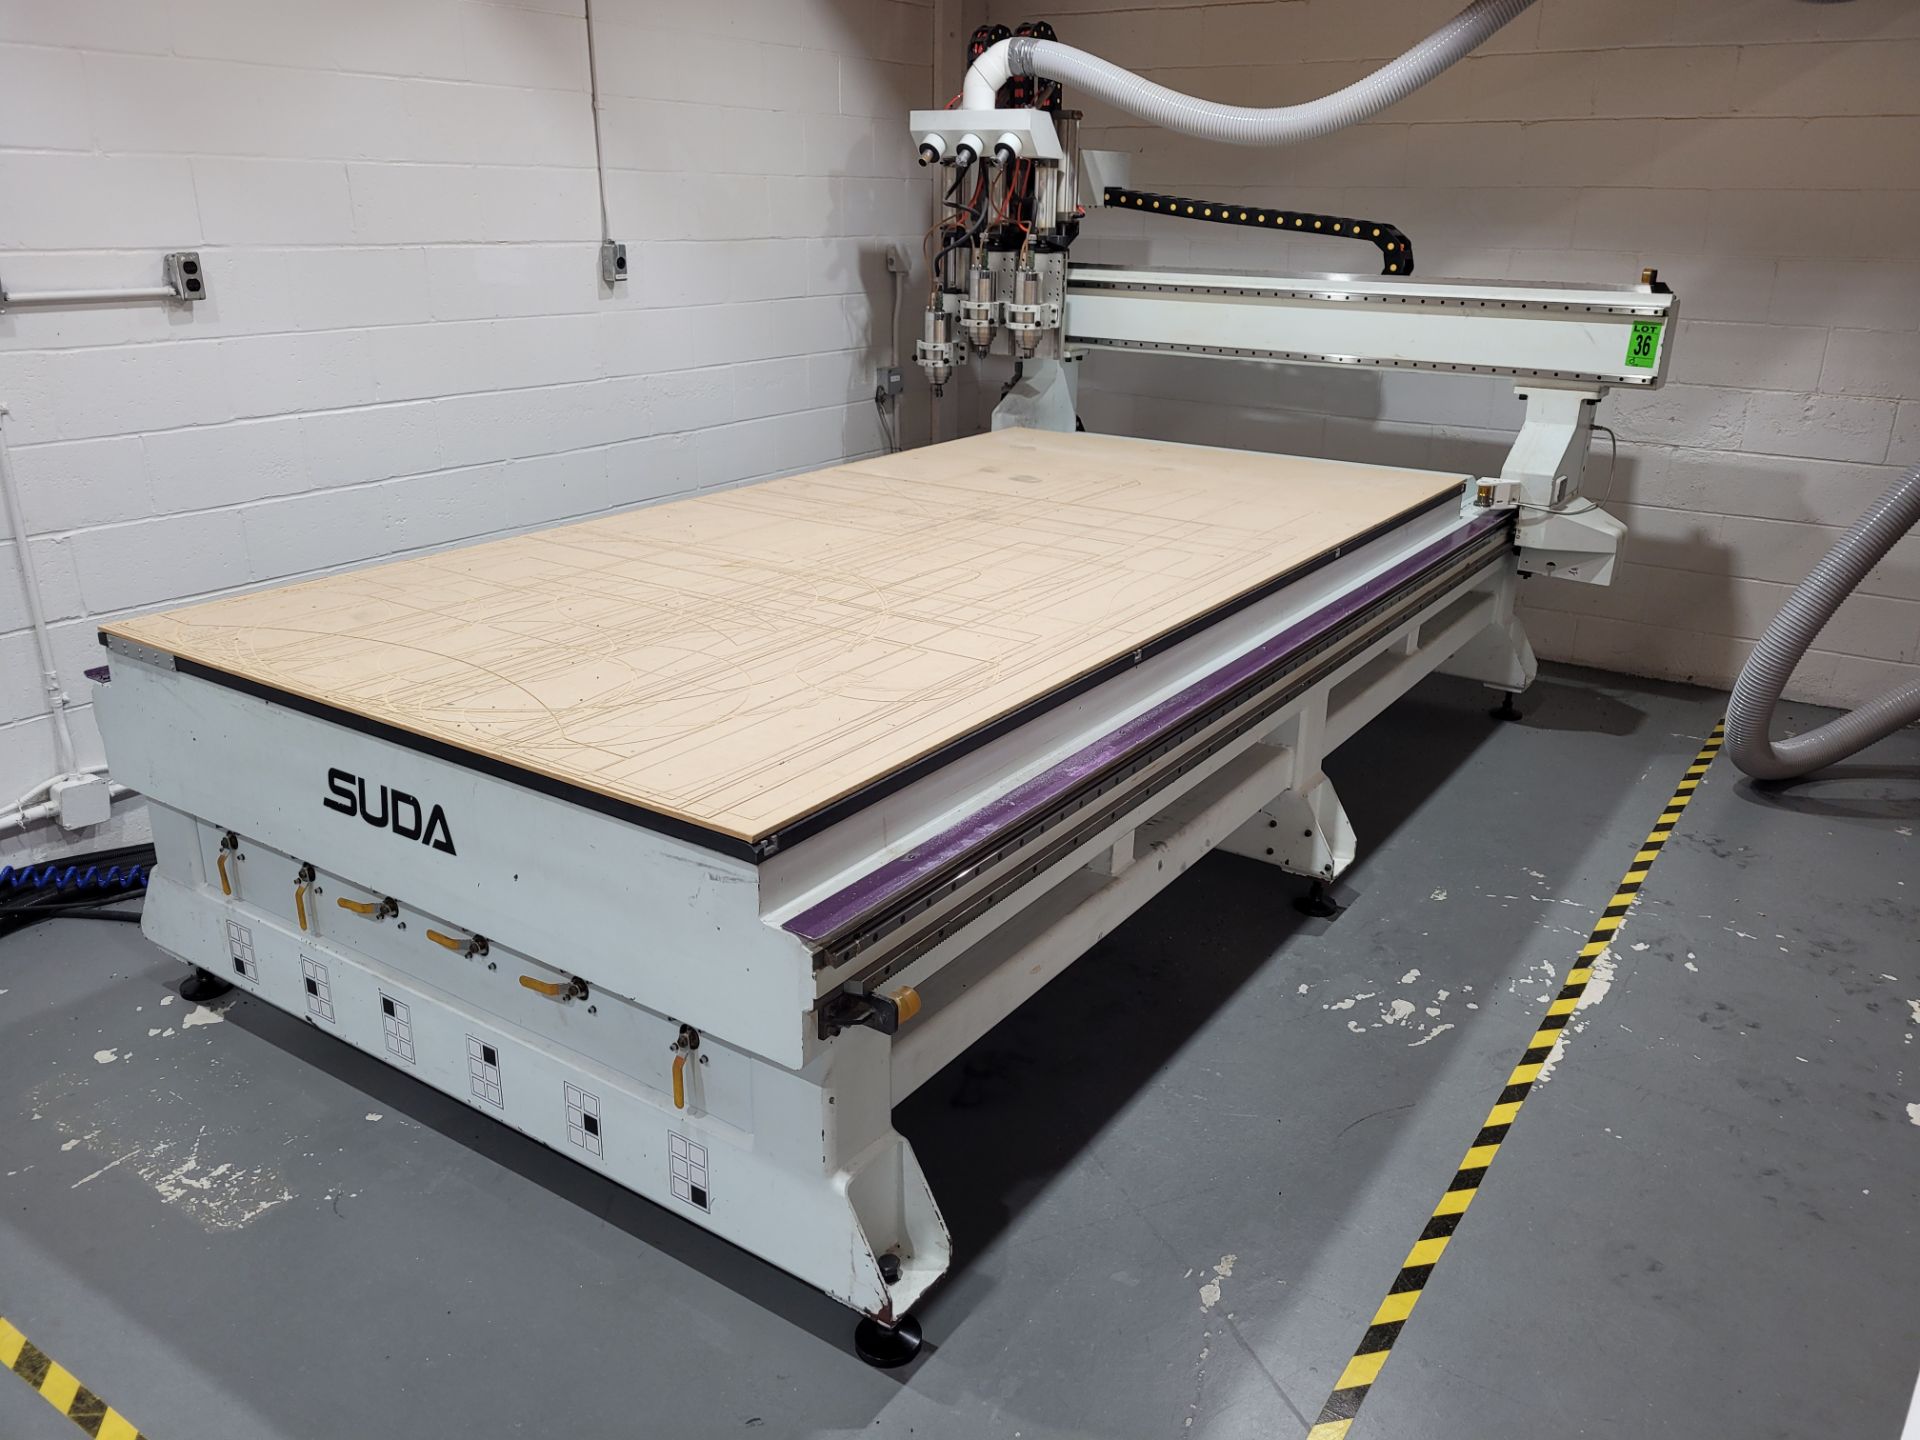 2015 SUDA ATC CNC Router mod. MG1630C, 3-Head System with Accessories and CRAFTEX mod. FM-300 Collec